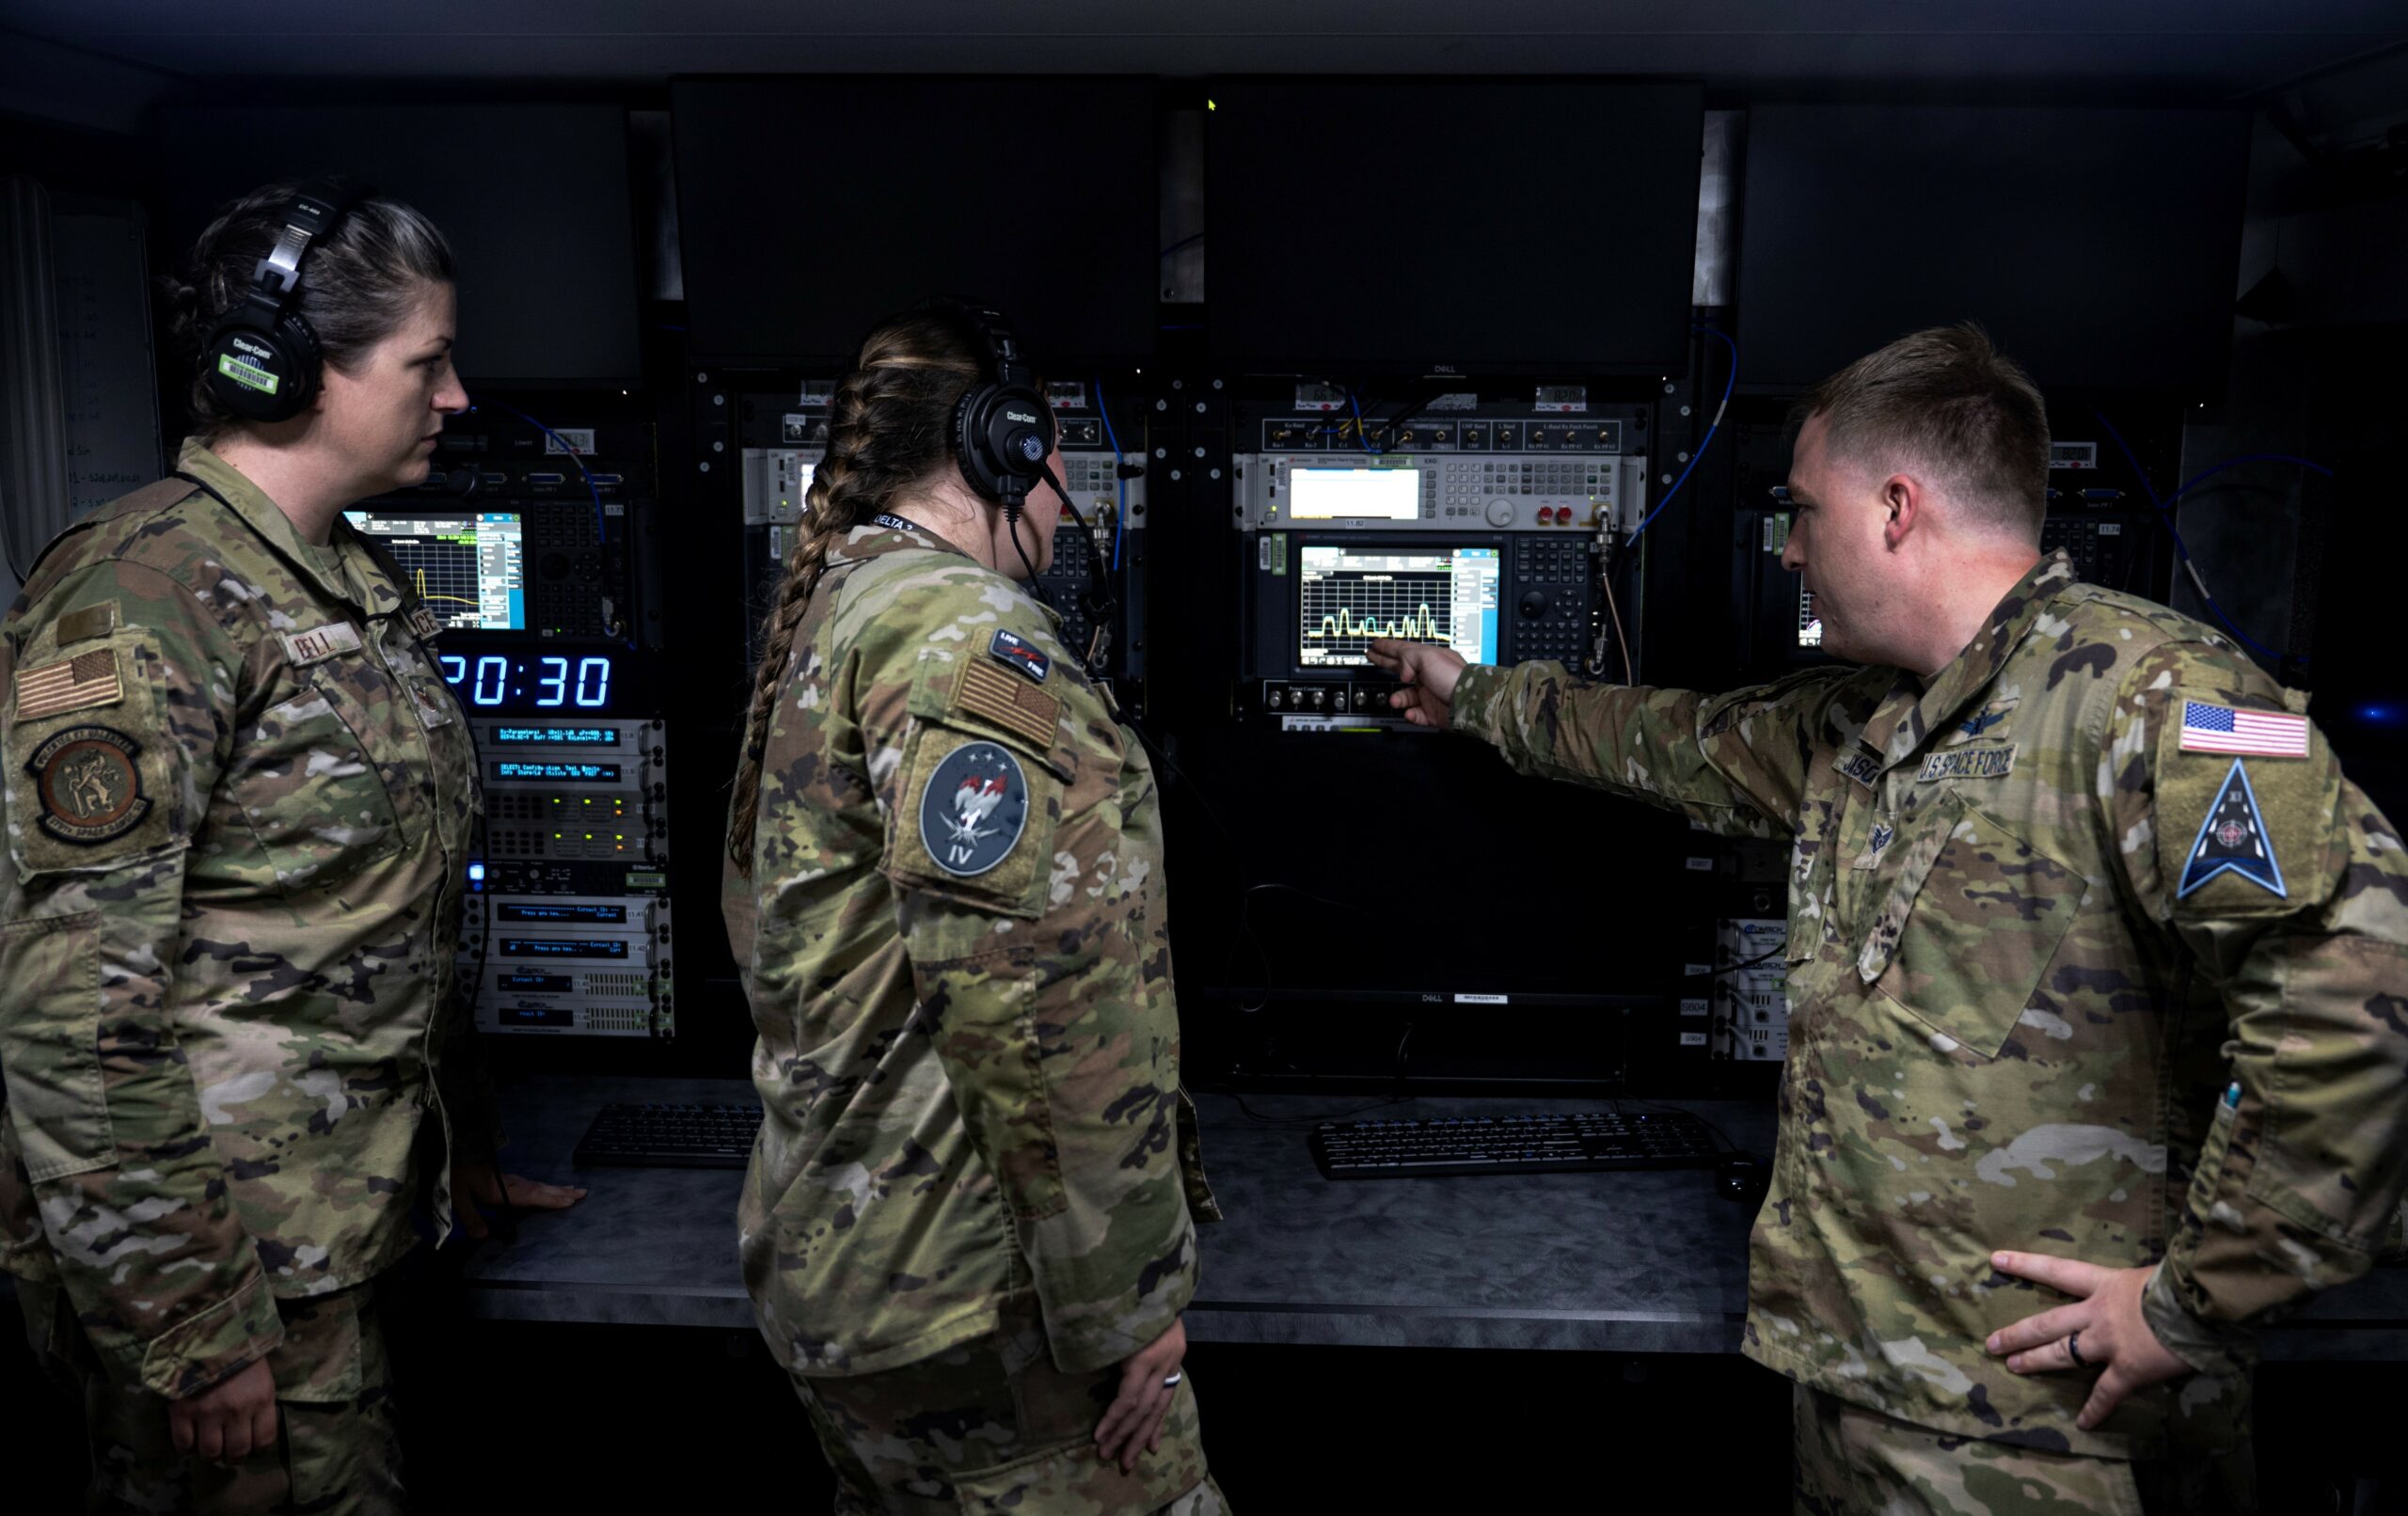 Service members from the U.S. Space Force and U.S. Air Force demonstrate the functionality of range equipment at Peterson Space Force Base, Colorado, Aug. 16, 2022. As part of a counterspace combined arms training event, two range squadrons, the U.S. Space Force’s 25th Space Range Squadron assigned to Delta 11, and the U.S. Air Force Reserve’s 379th Space Range Squadron, supported training for the USSF’s 4th Electronic Warfare Squadron and integrated an additional service partner unit for the first time. (U.S. Air Force photo by 1st Lt Charles Rivezzo)